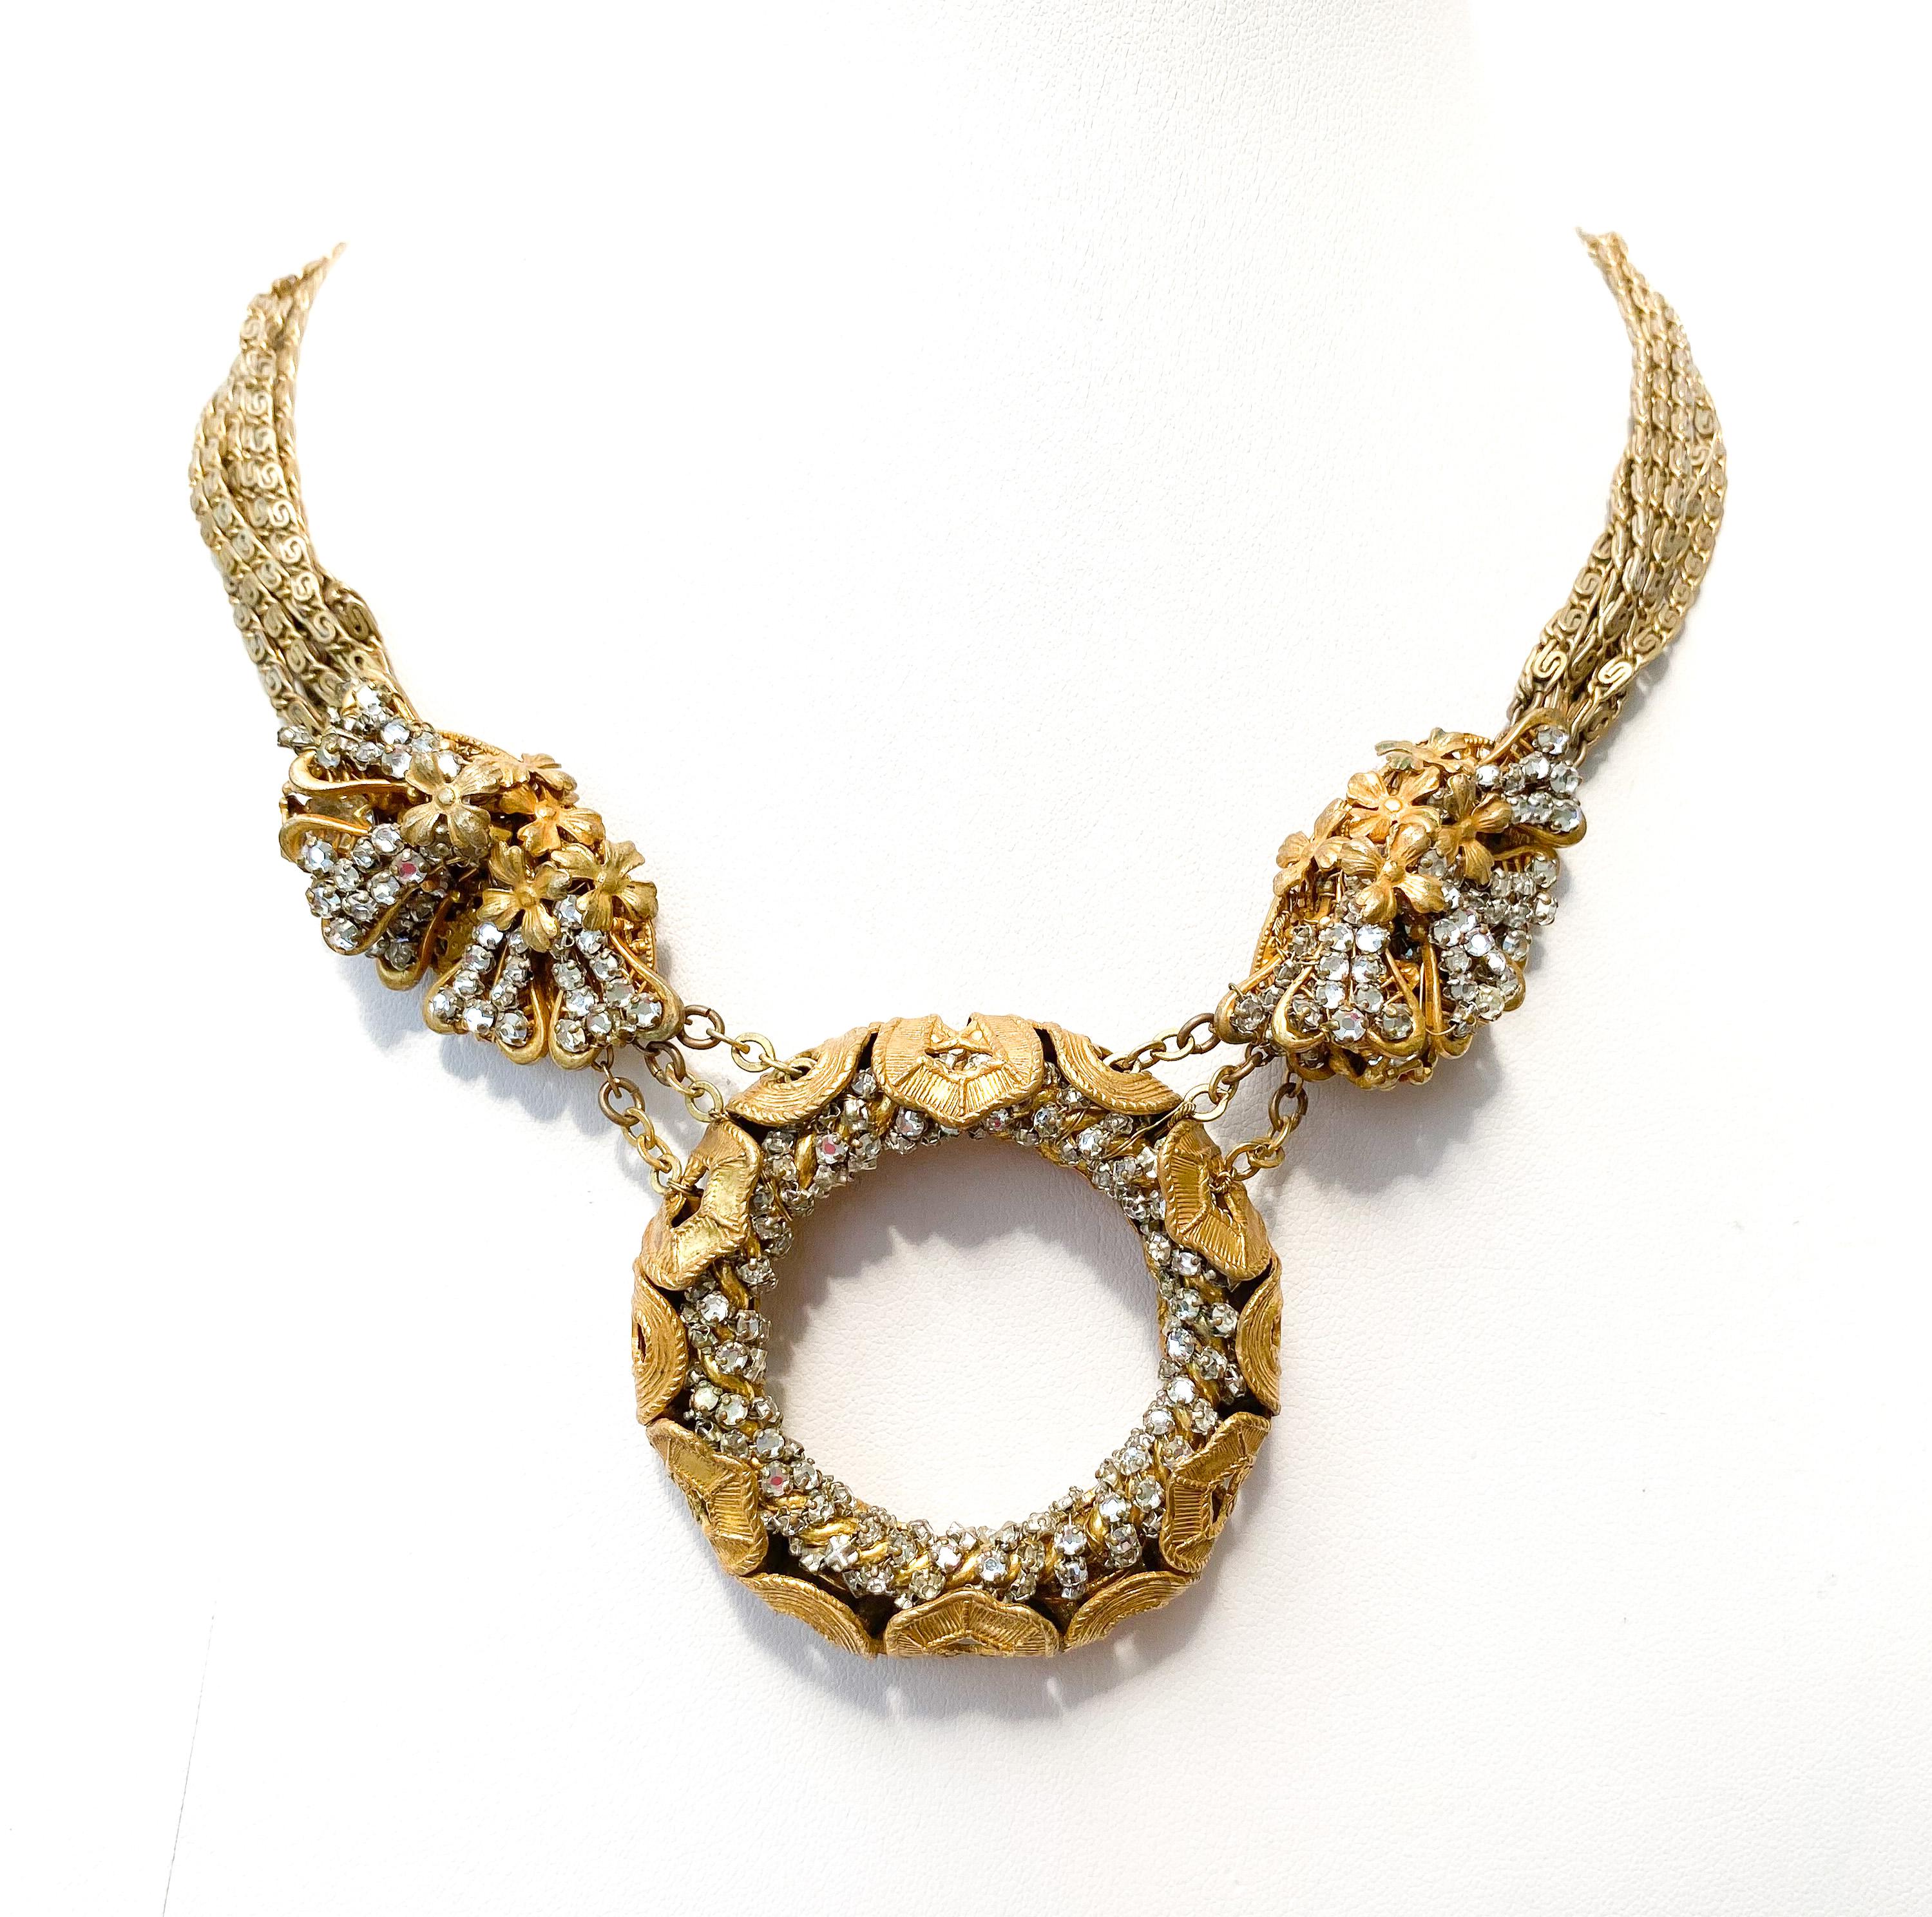 A splendid necklace deigned by the earliest and leading designer for Miriam Haskell, Frank Hess. Made from gilt metal and rose montes (clear flatback pastes individually set), it is classic vintage Haskell. Using an elegant flattened chain, hand